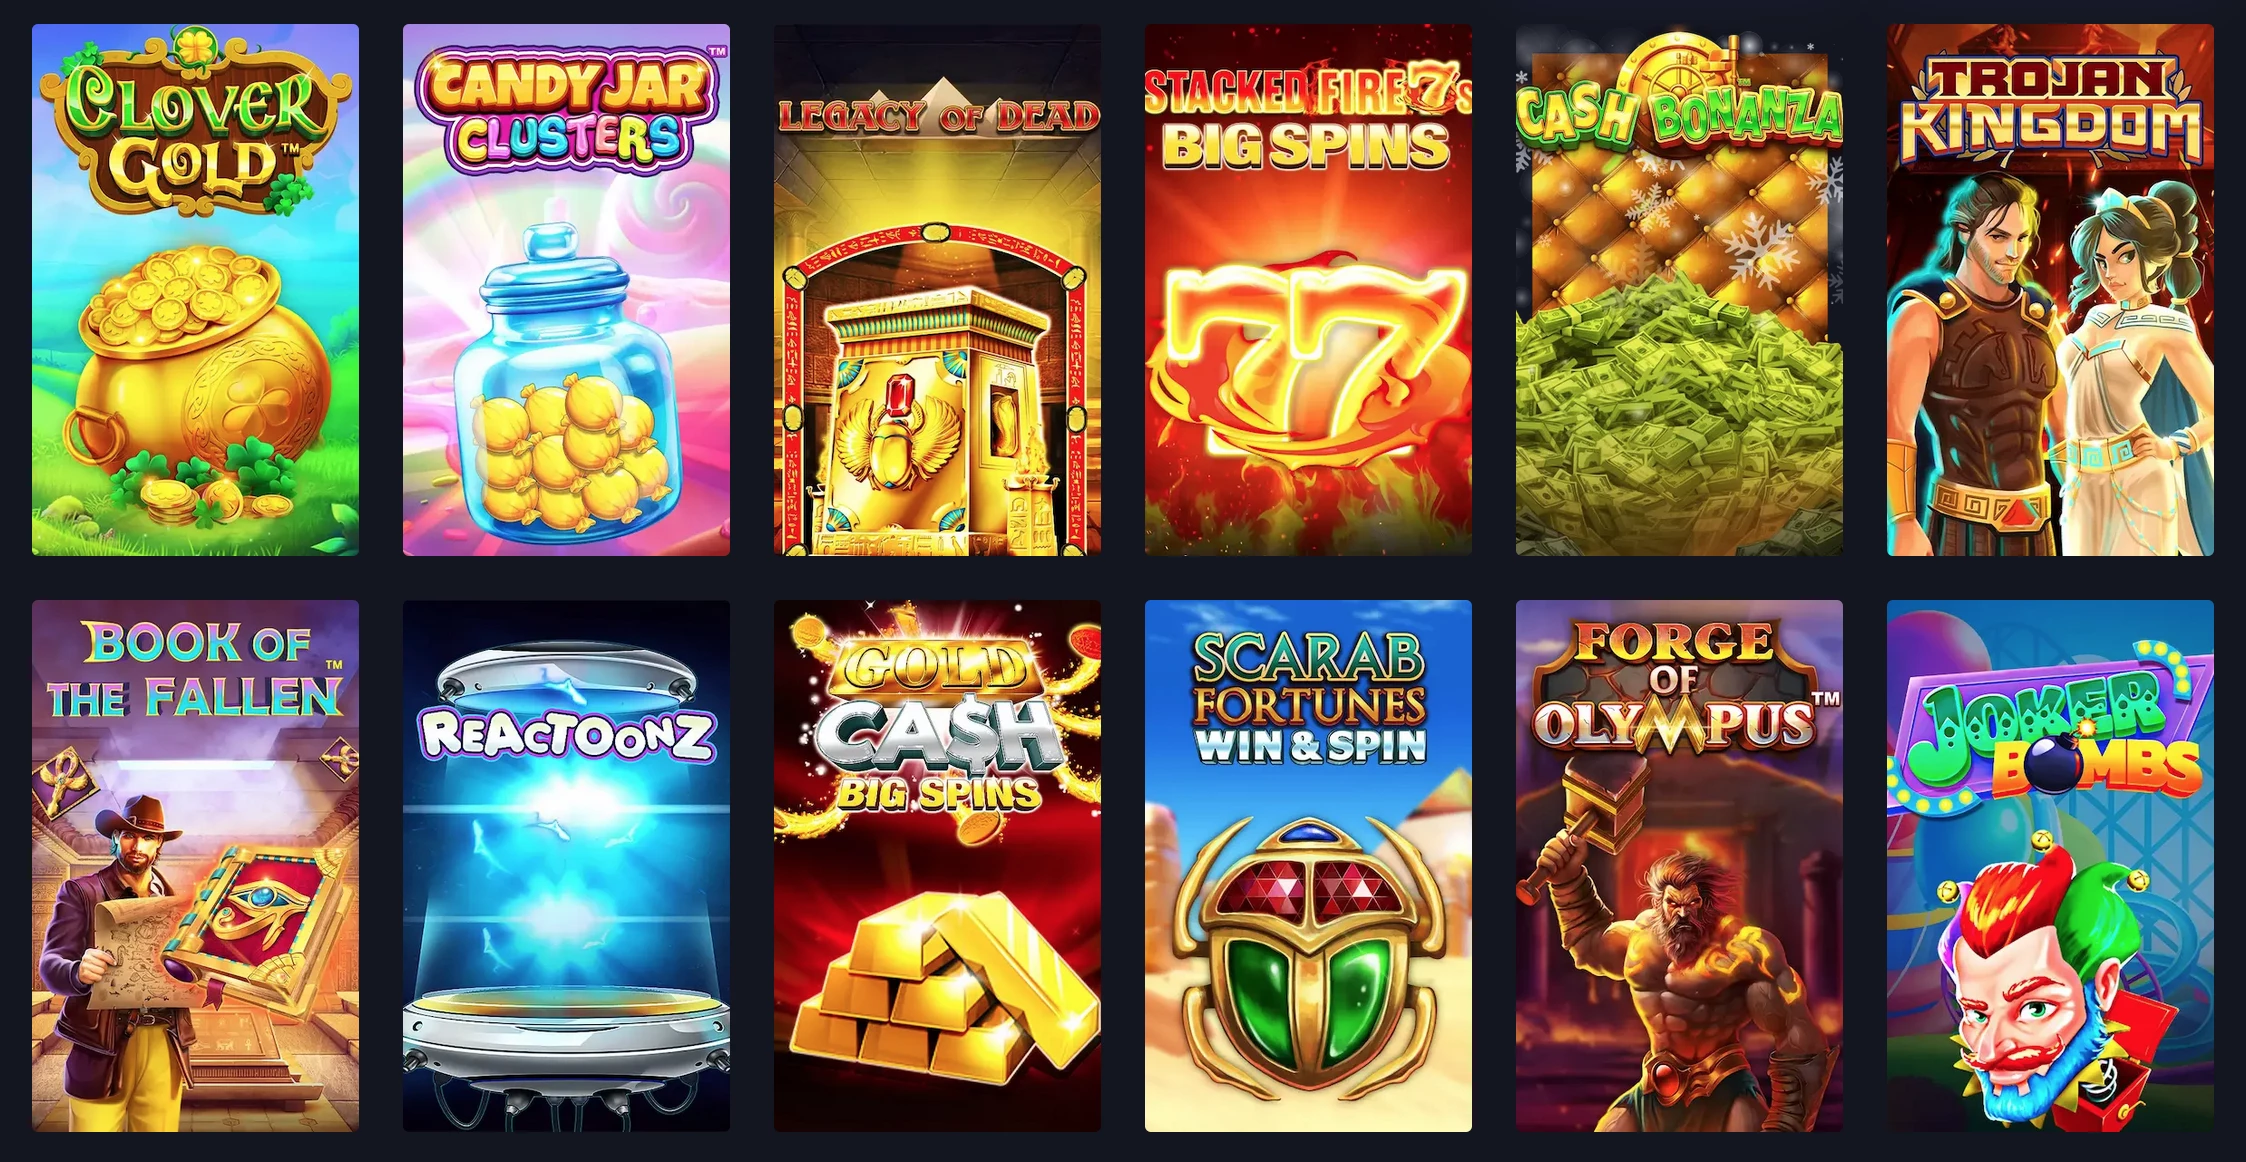 Best Casino Sign Up Offers UK